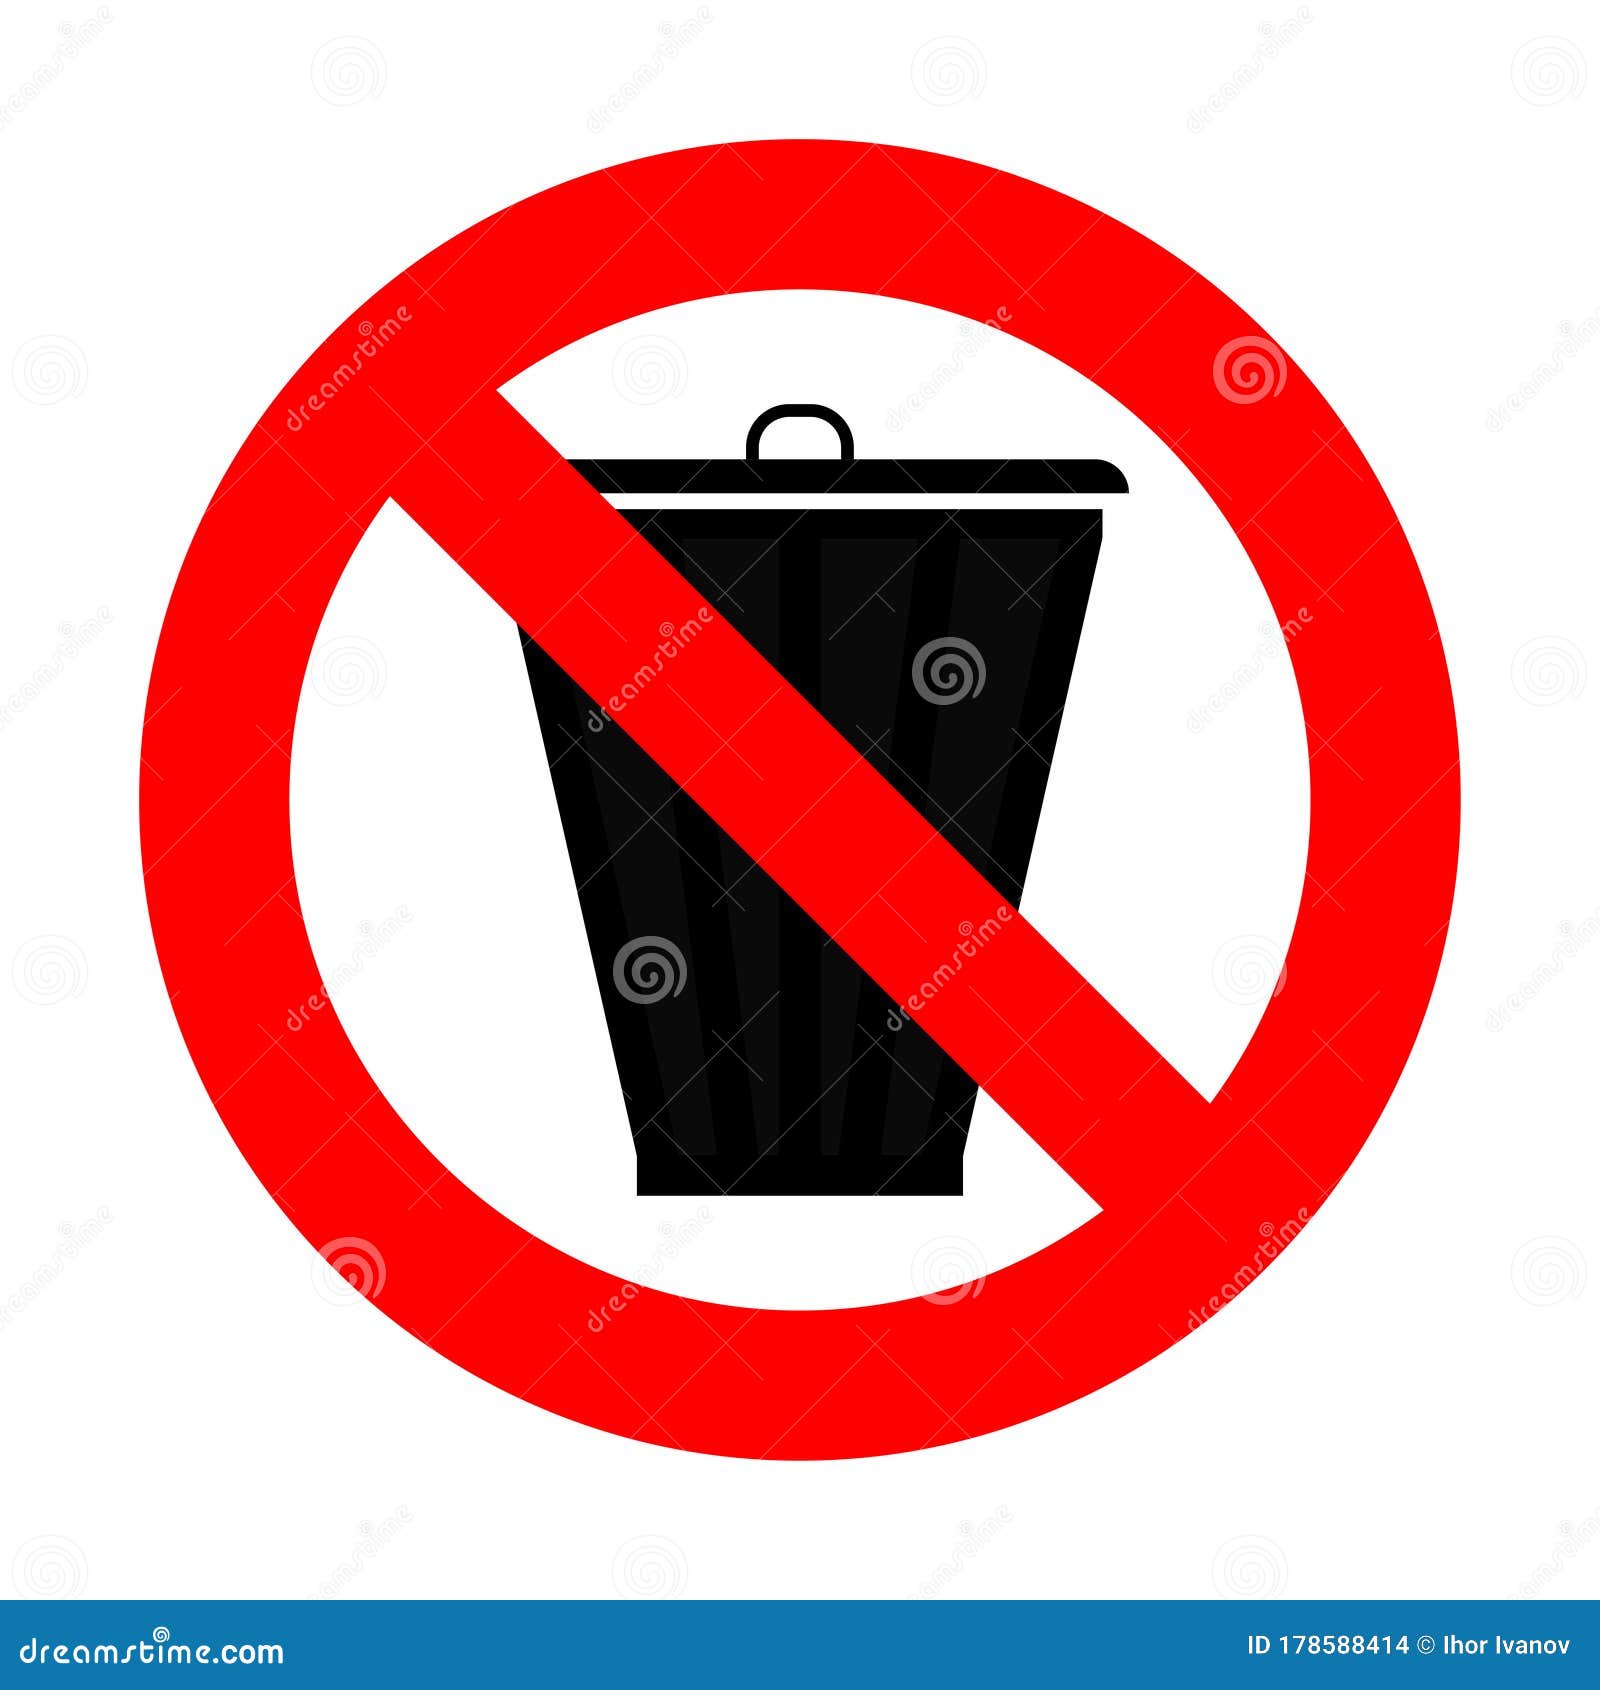 All 97+ Images this is not a trash can sign Excellent